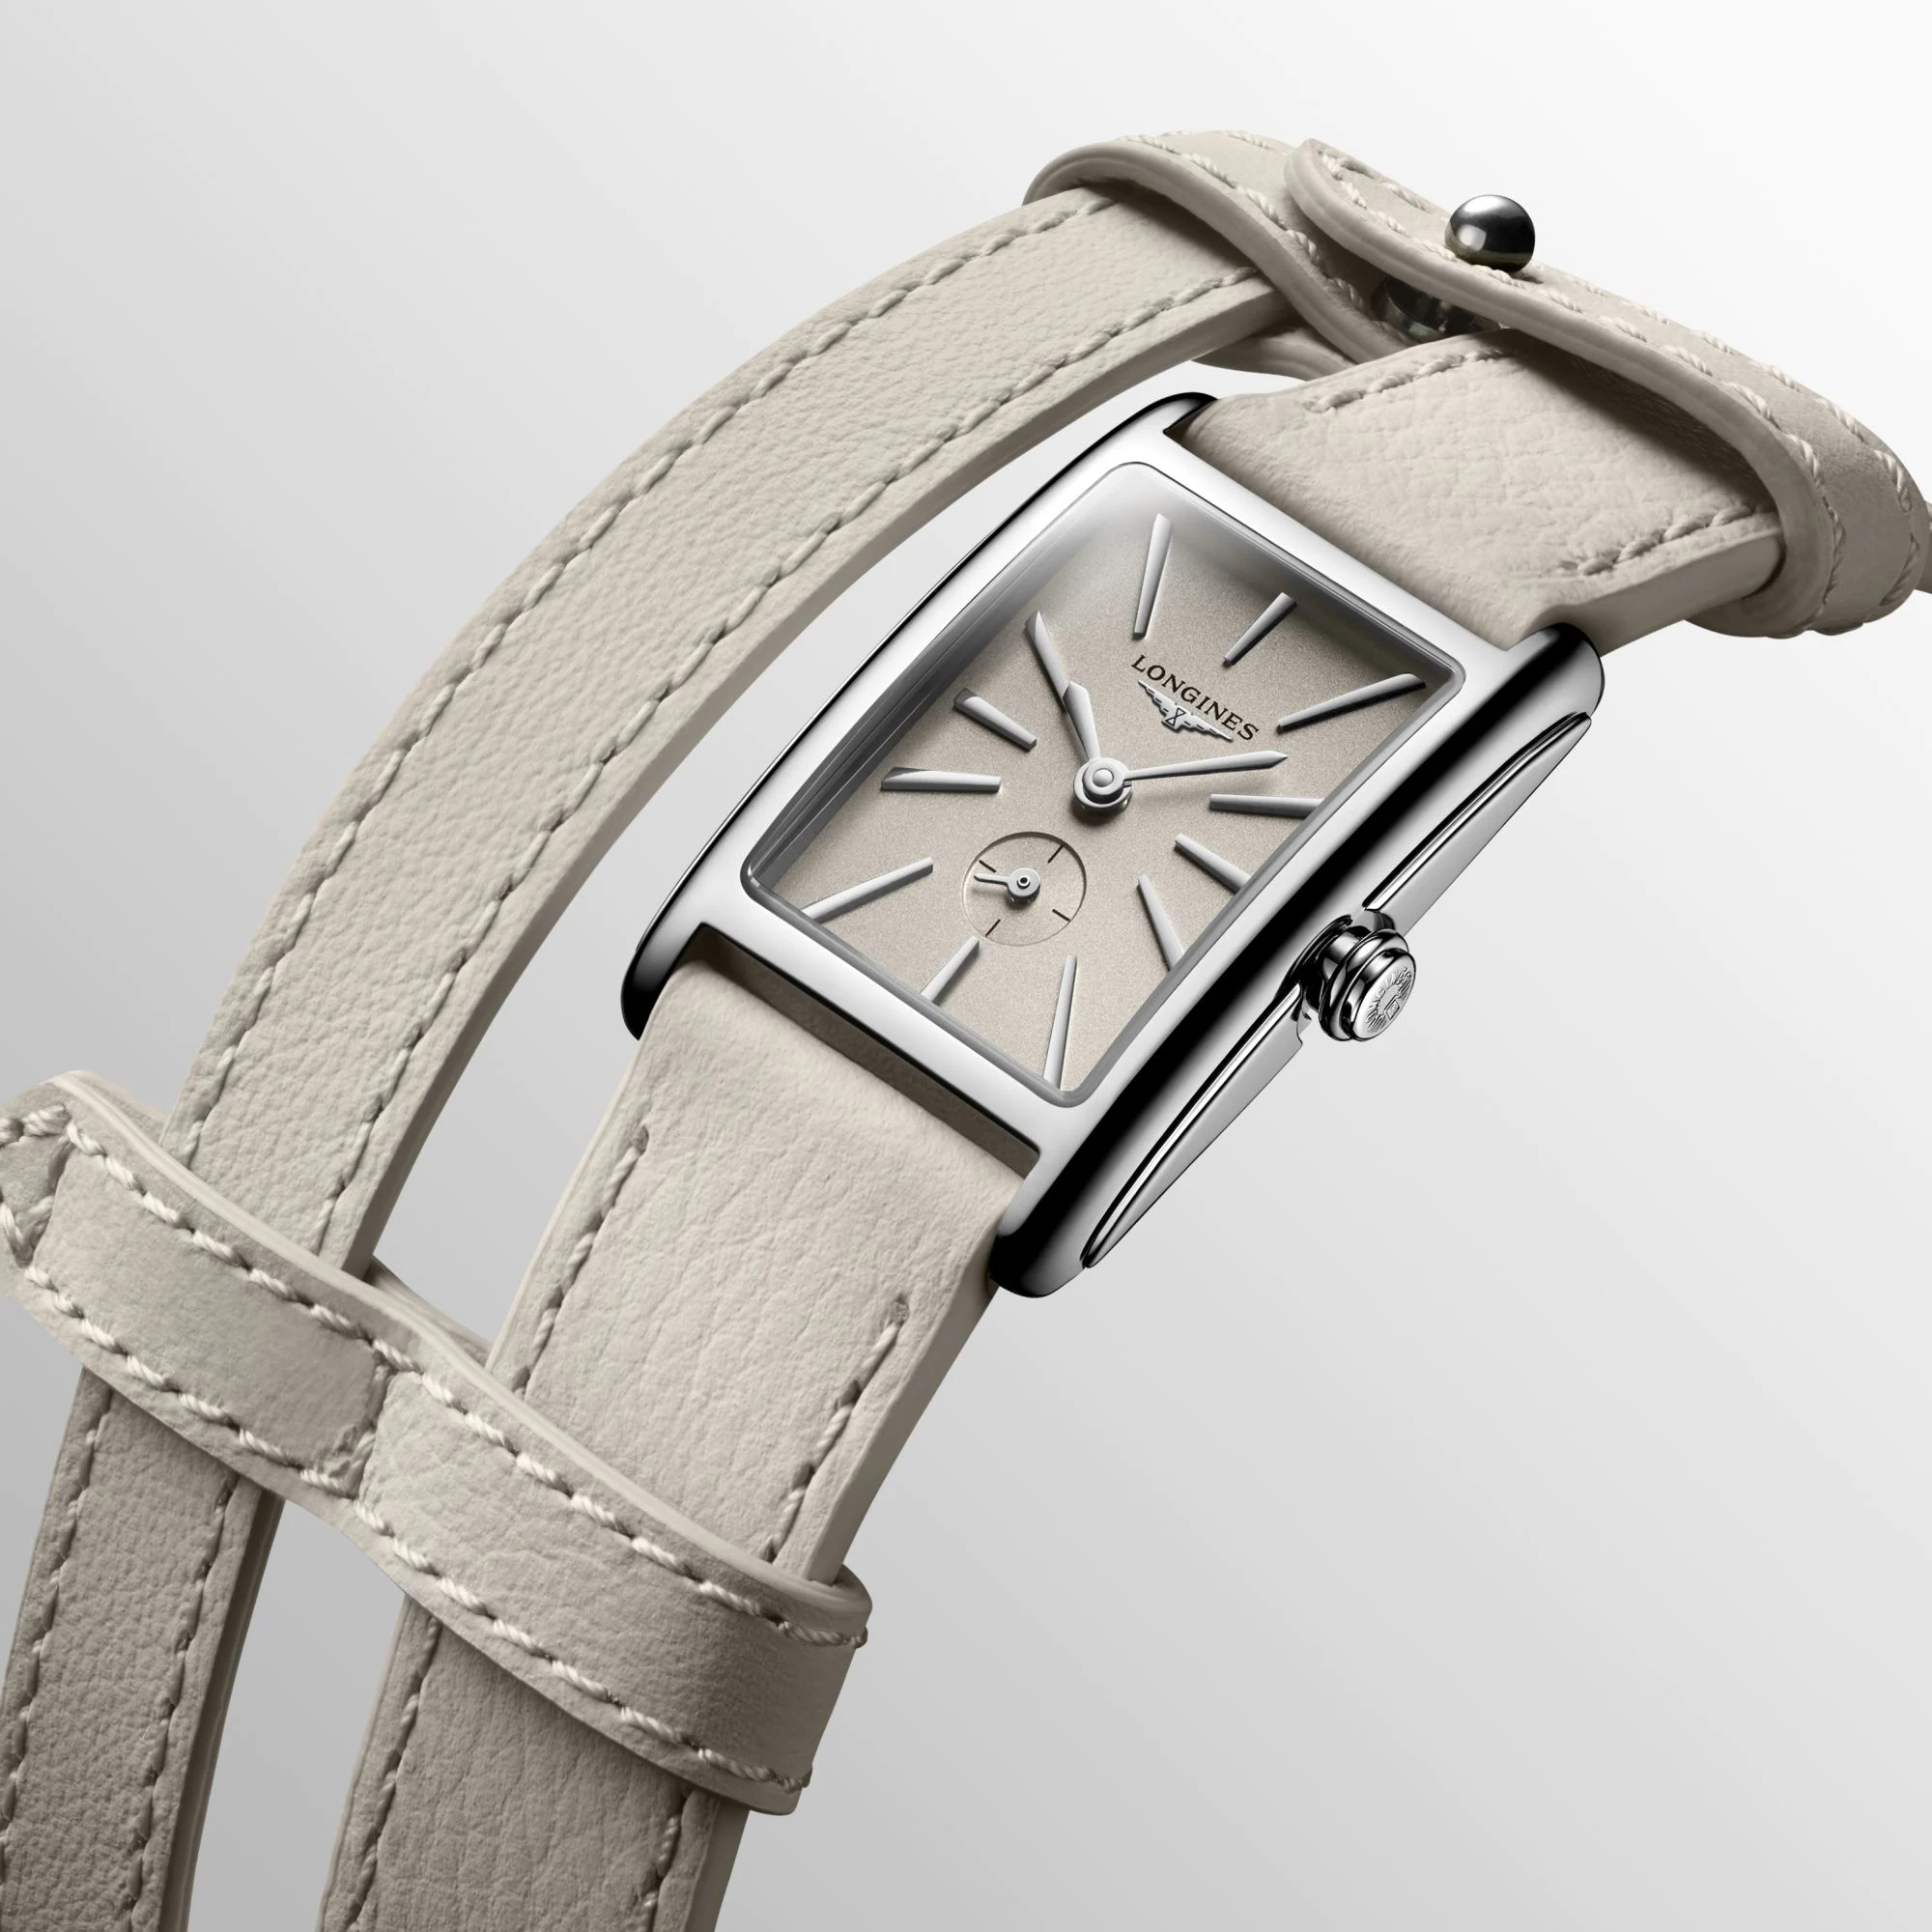 longines-dolcevita-l5-255-4-79-2-detailed-view-2000x2000-101-1667421483